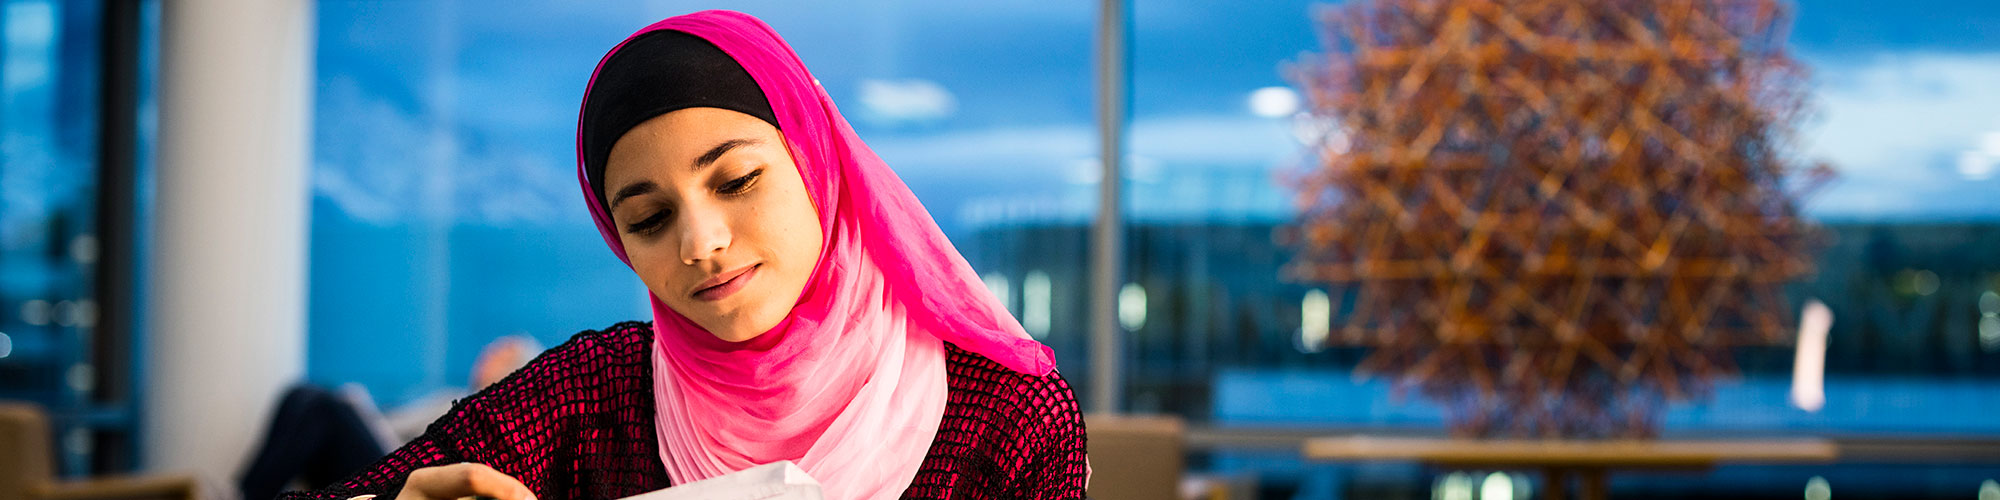 A woman with a head scarf reading something, smiling